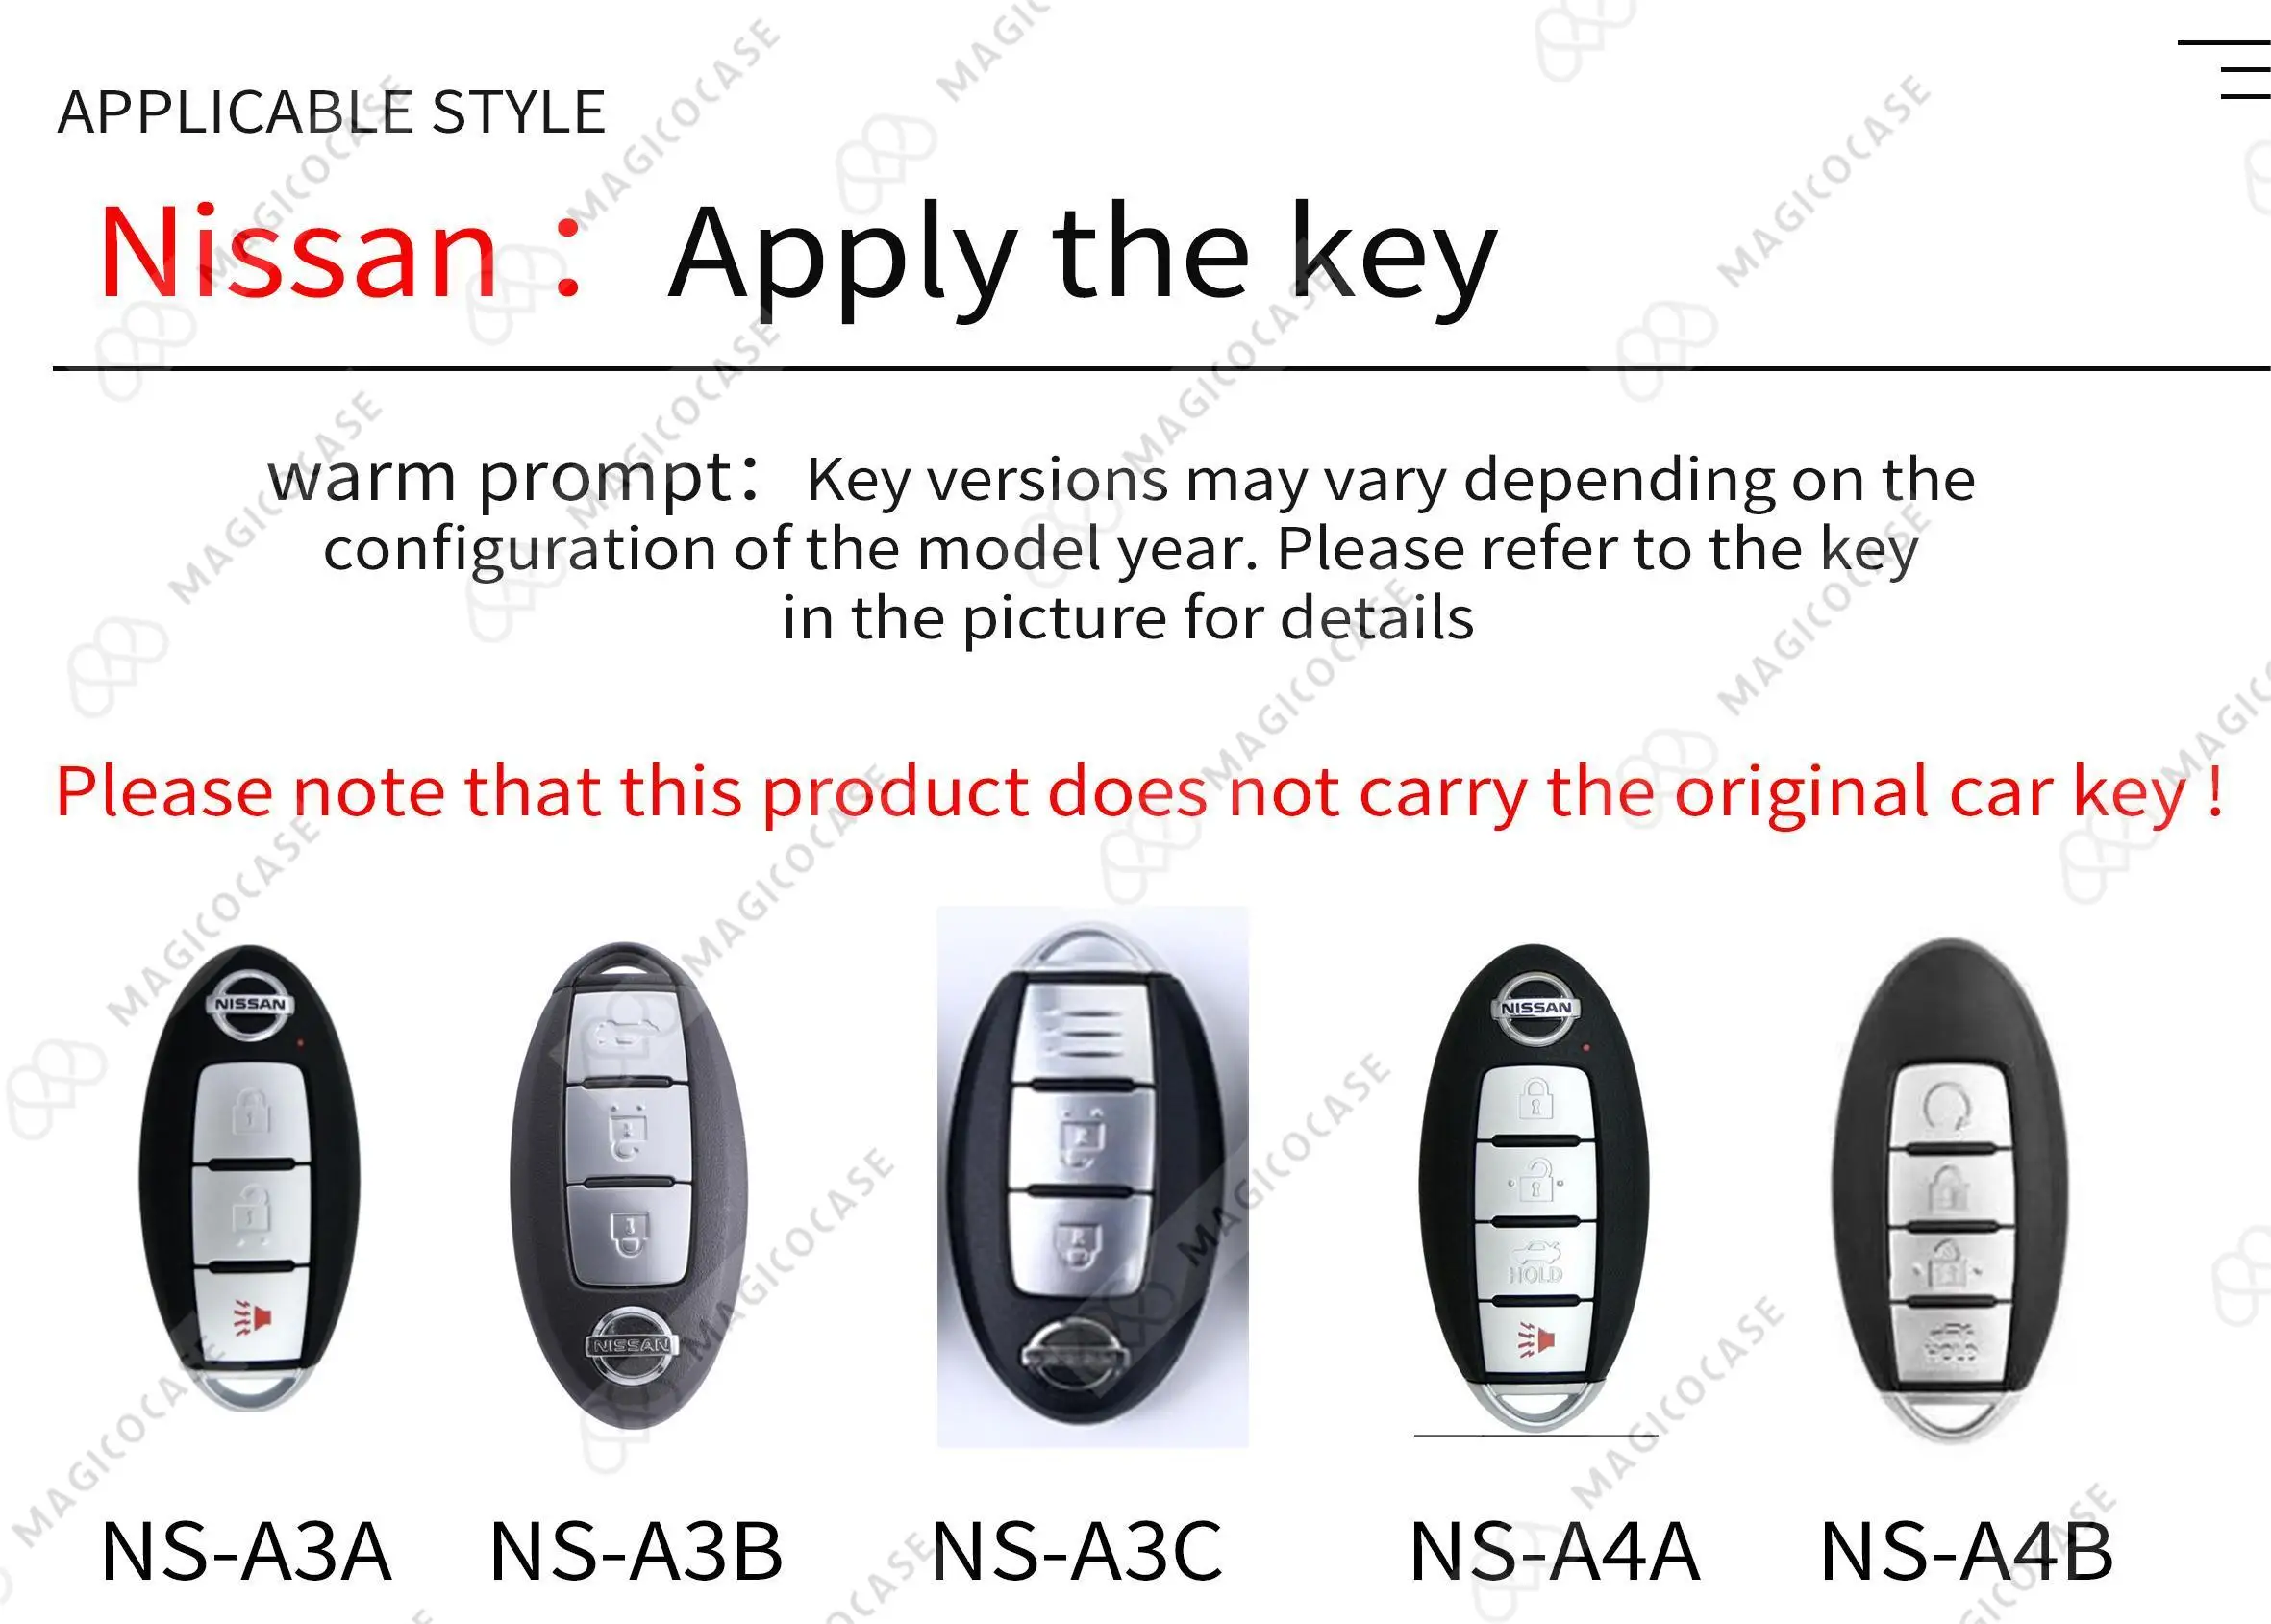 Free Sample 4 Colors Diamond TPU 3 Buttons Smart Key Case Cover Holder For Nissan Sylphy/Teana/Qashqai Accessories